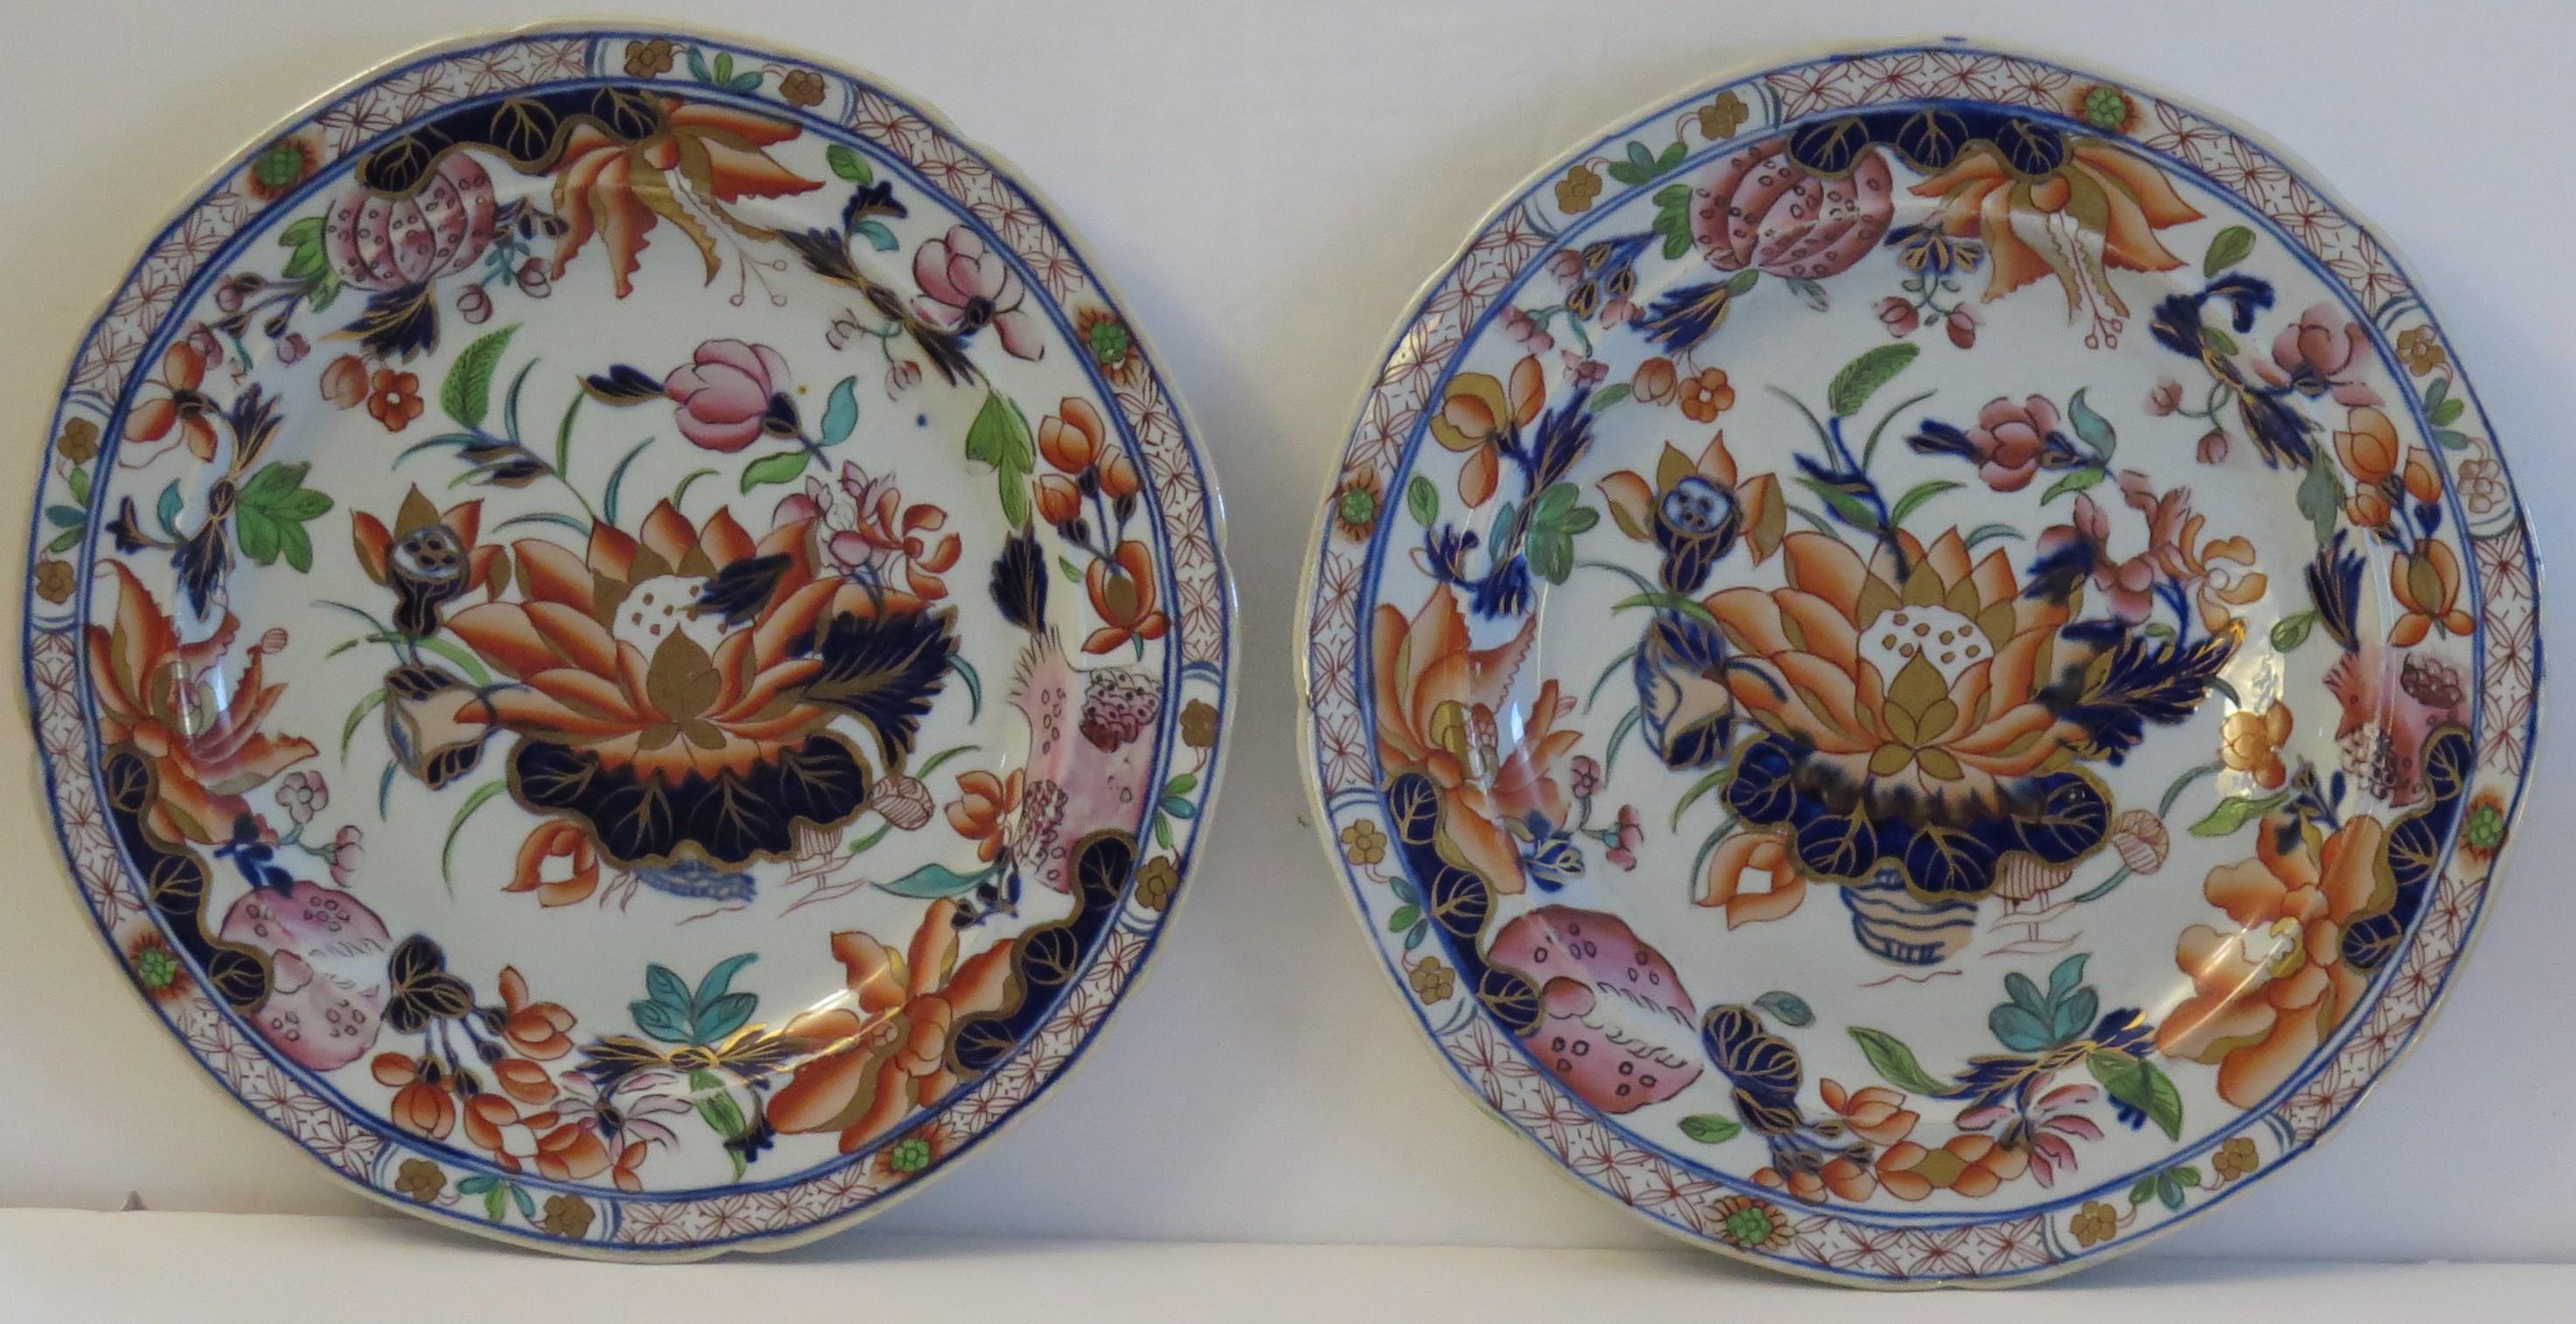 Chinoiserie Fine Pair of Georgian Mason's Ironstone Plate in Water Lily Pattern, circa 1818